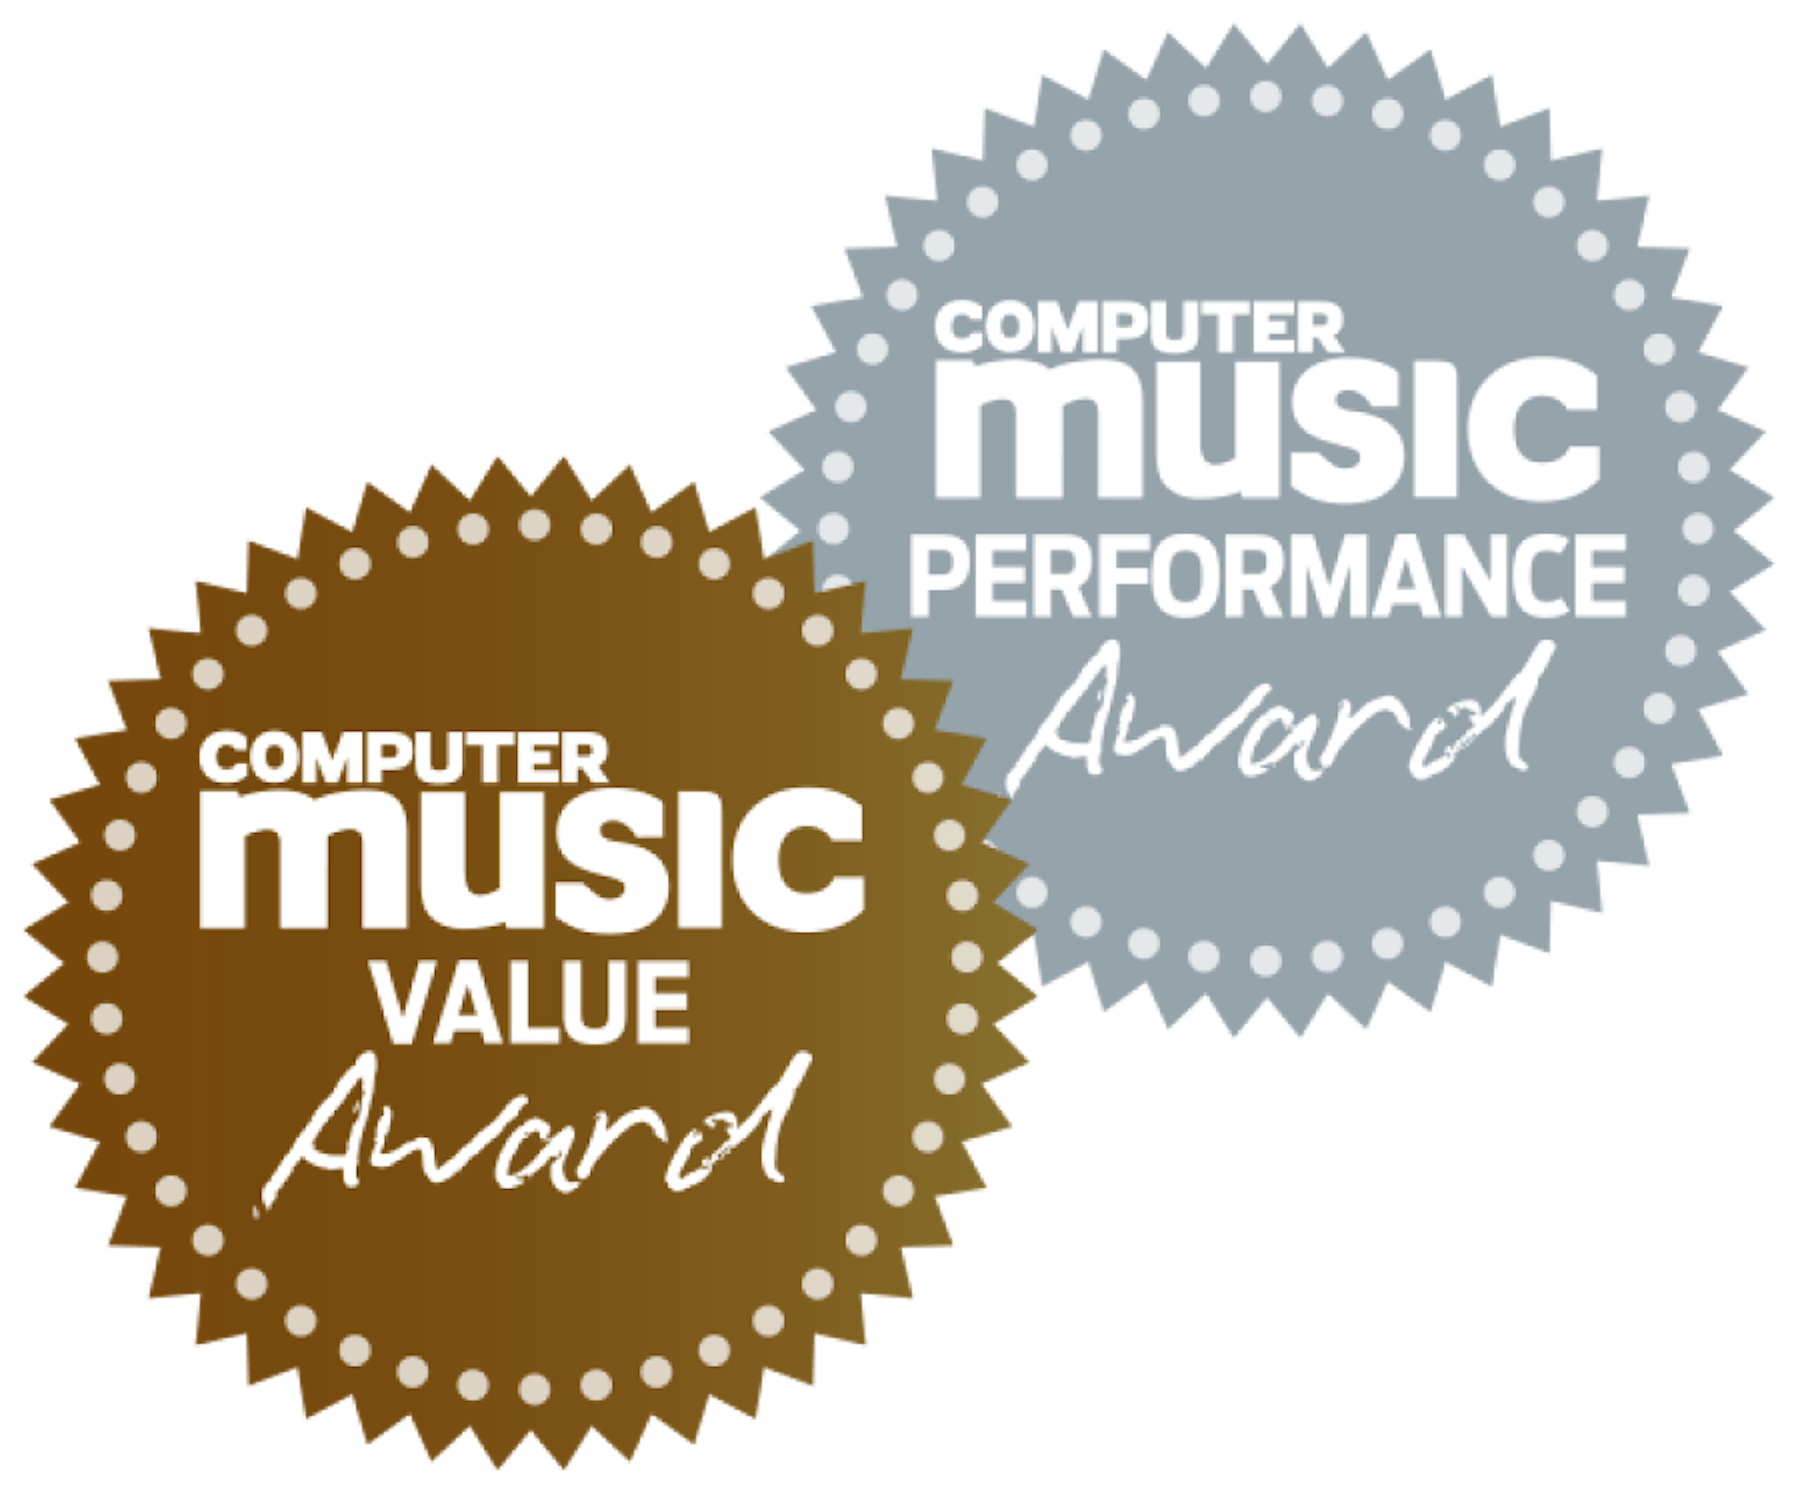 Computer Music Performance and Value Awards